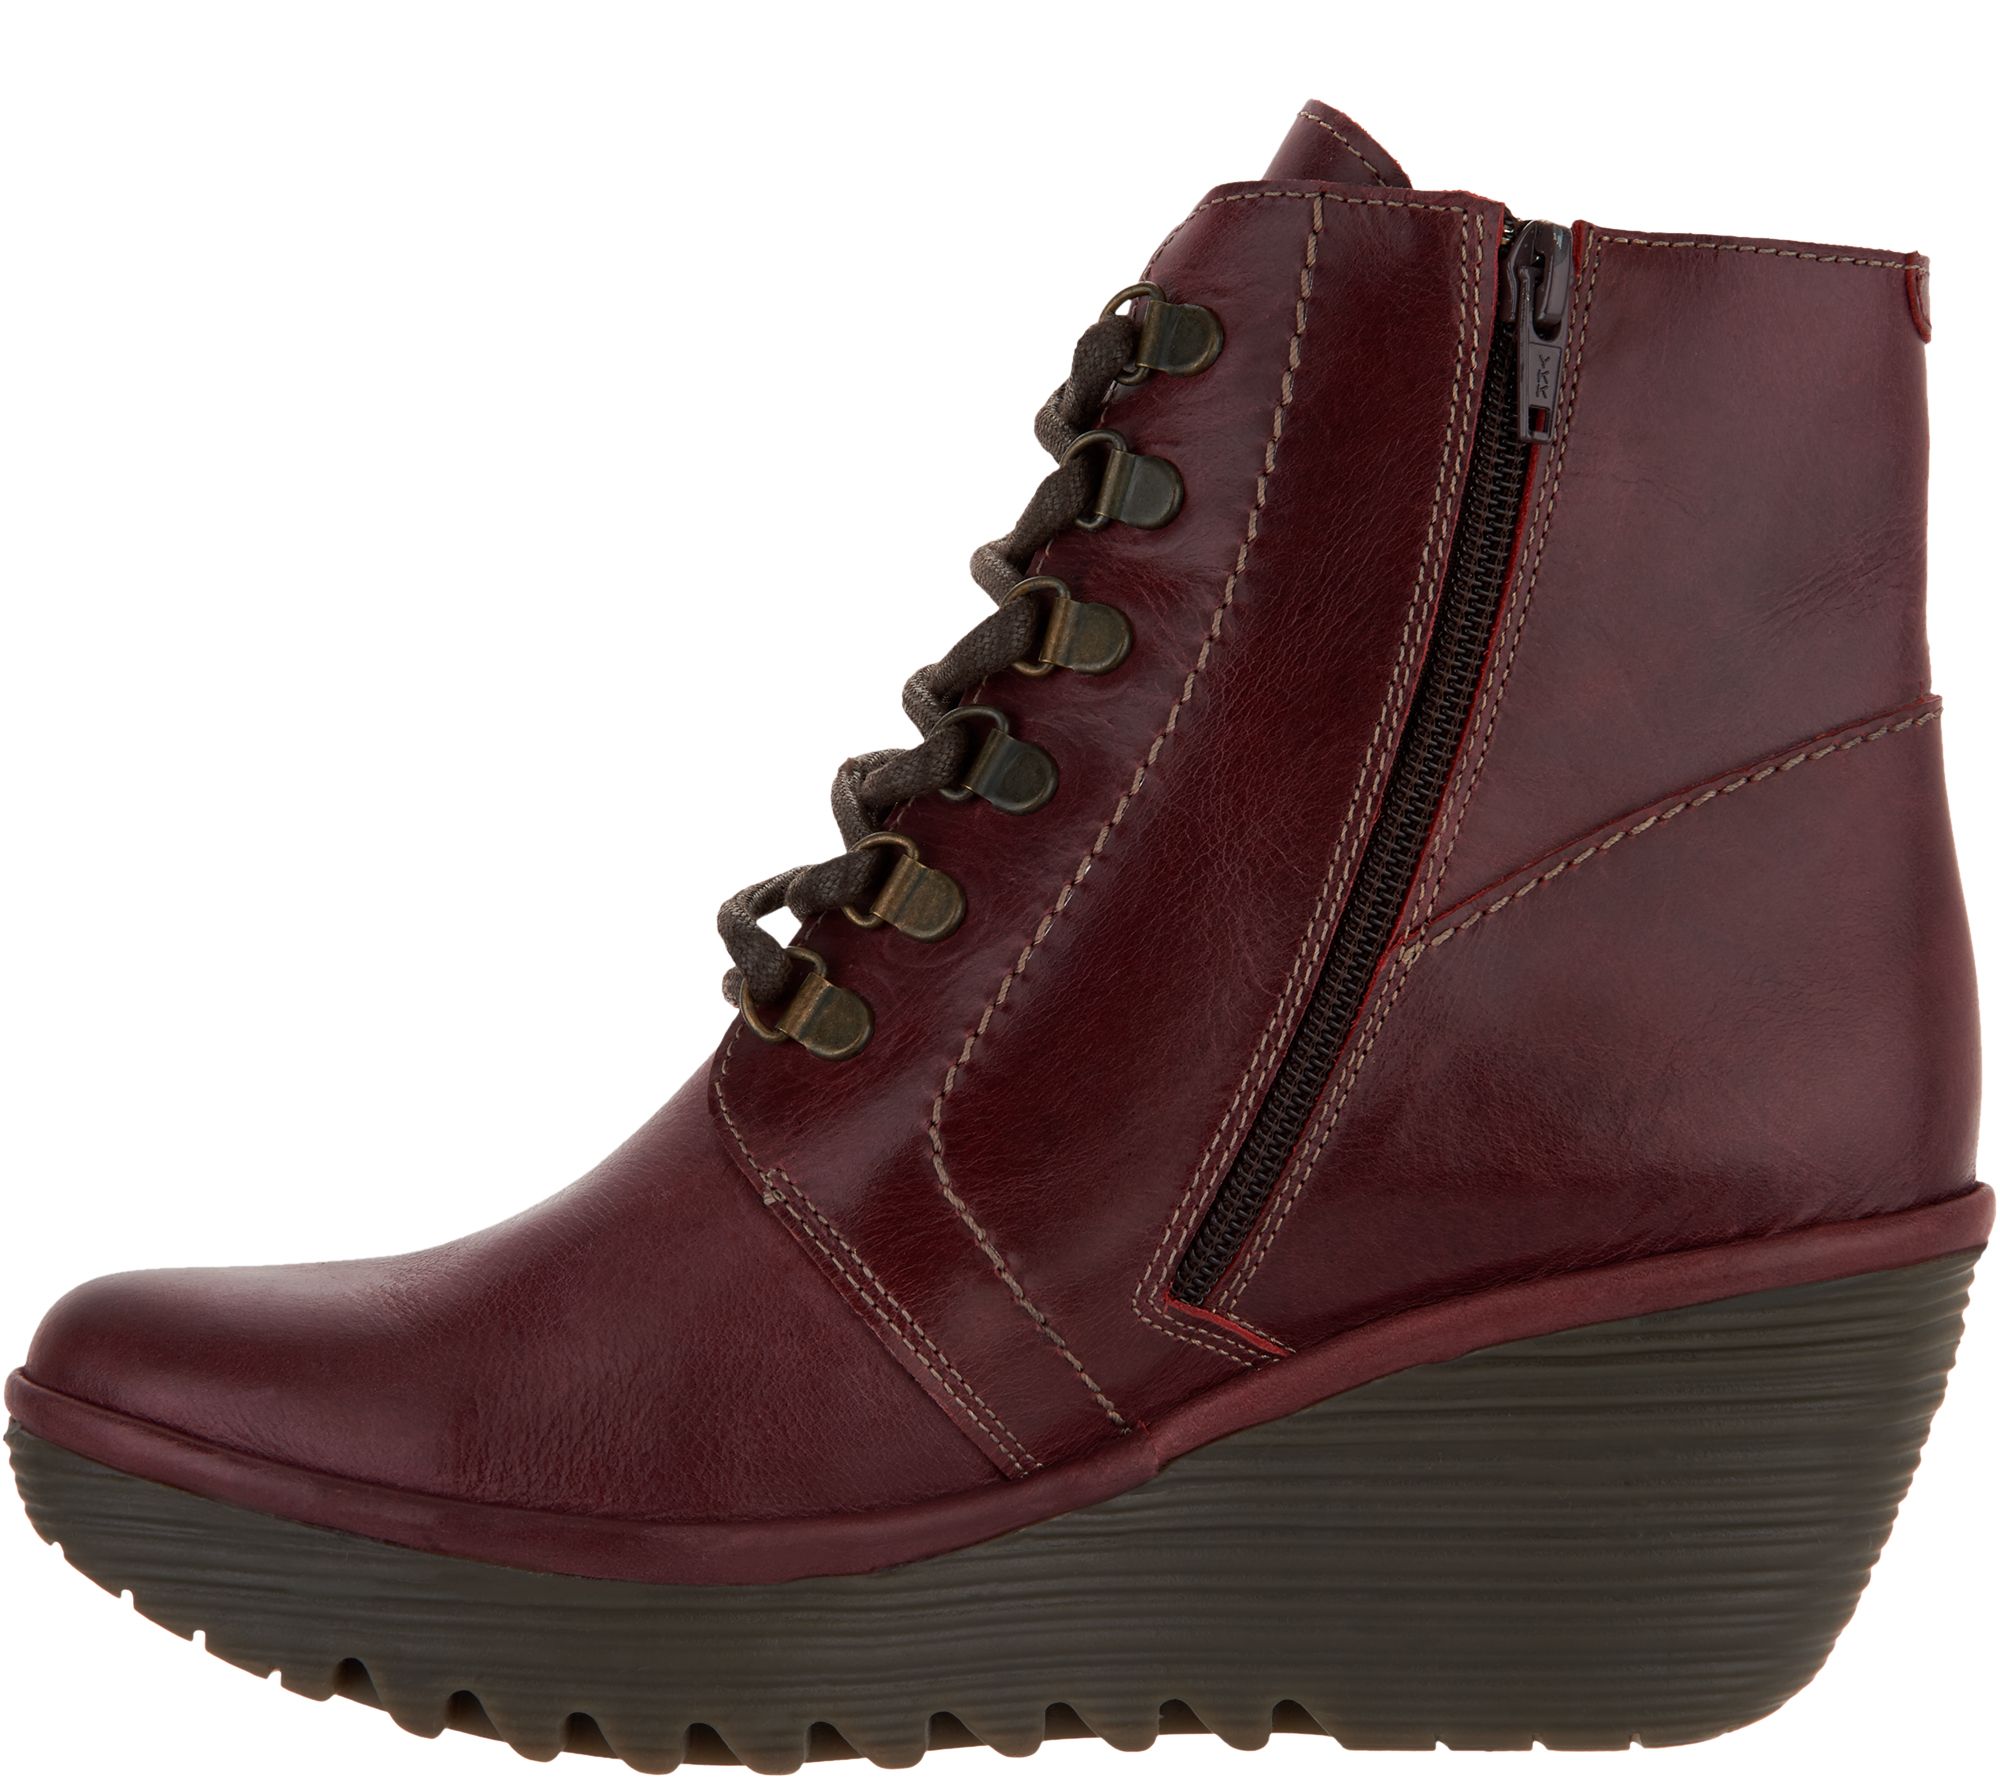 FLY London Leather Lace-up Wedge Ankle Boots - Yarn - QVC.com